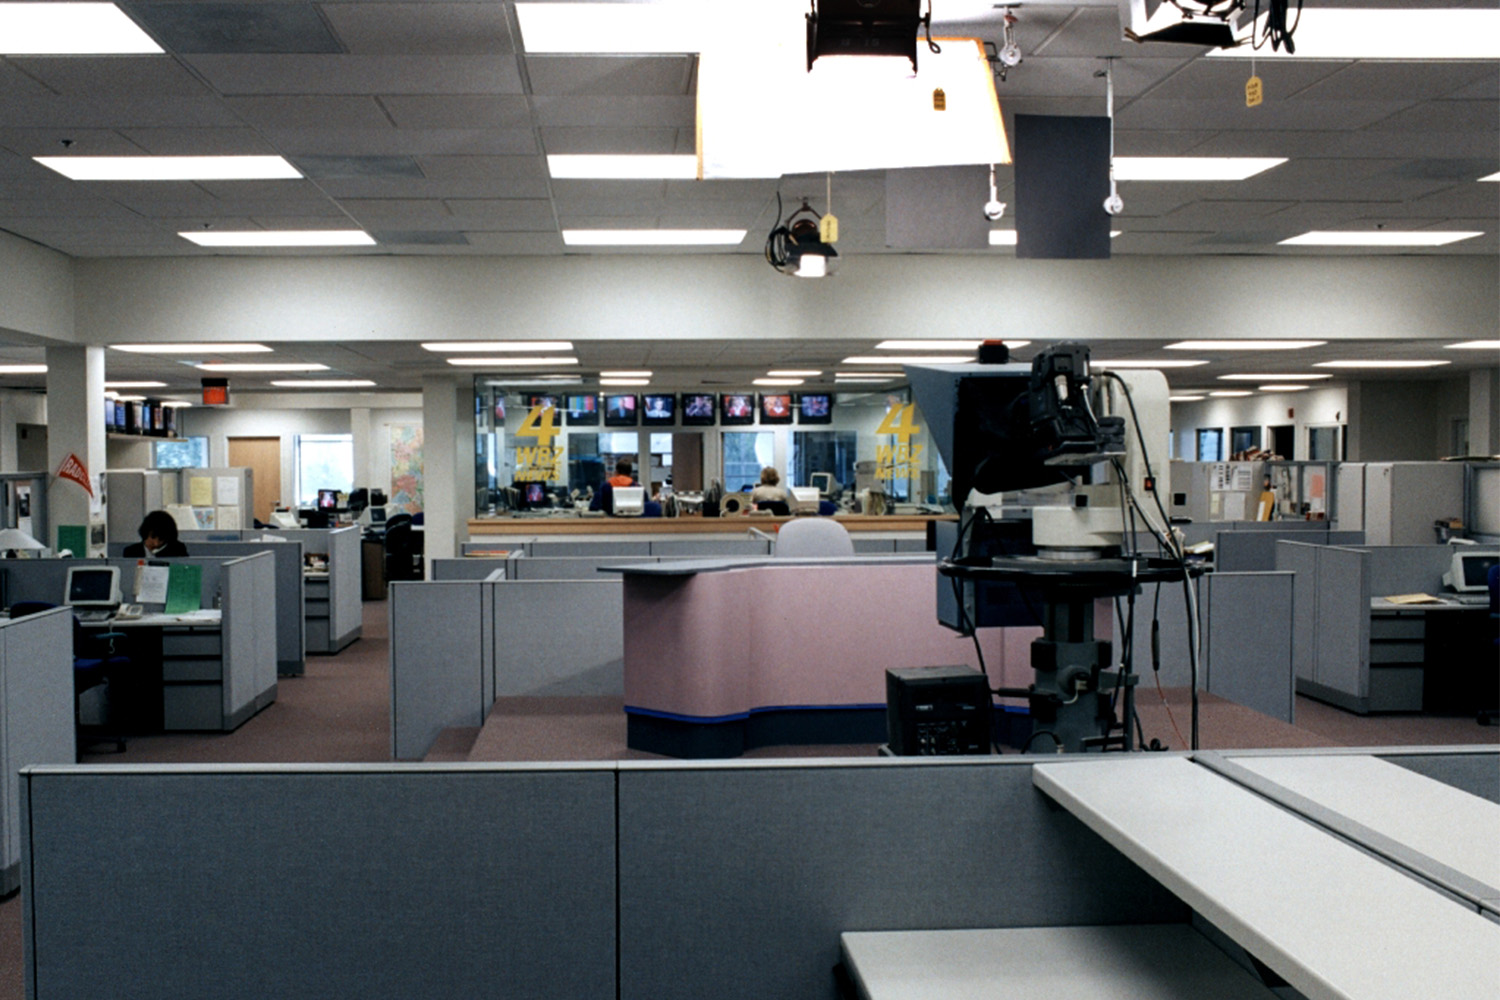 WBZ newsroom with cubicles and TV's mounted on walls 